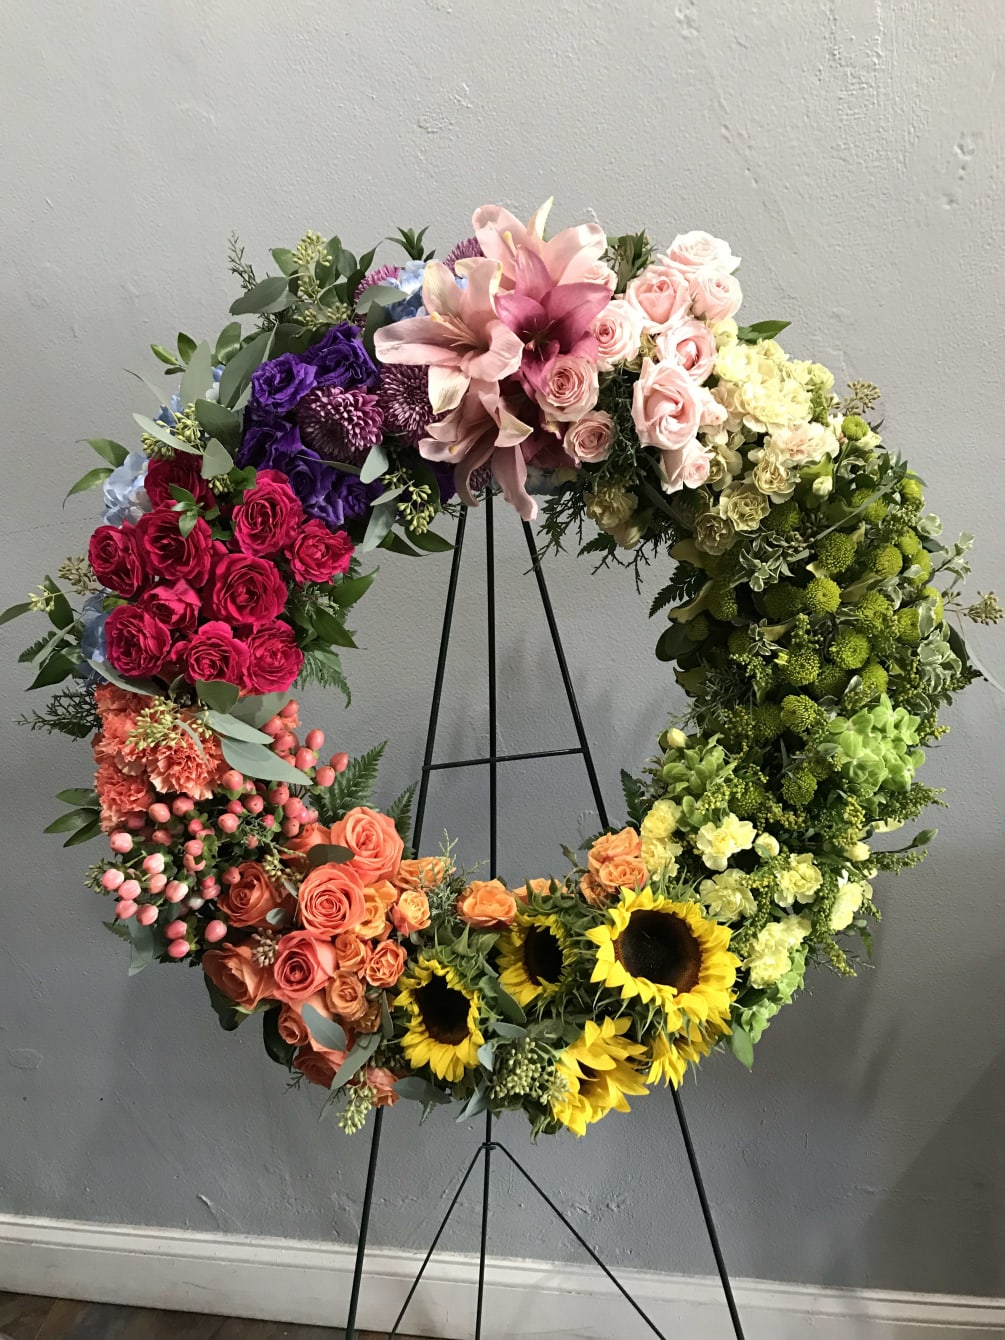 A circular wreath with warm, fun, colorful flowers. A demonstration of love